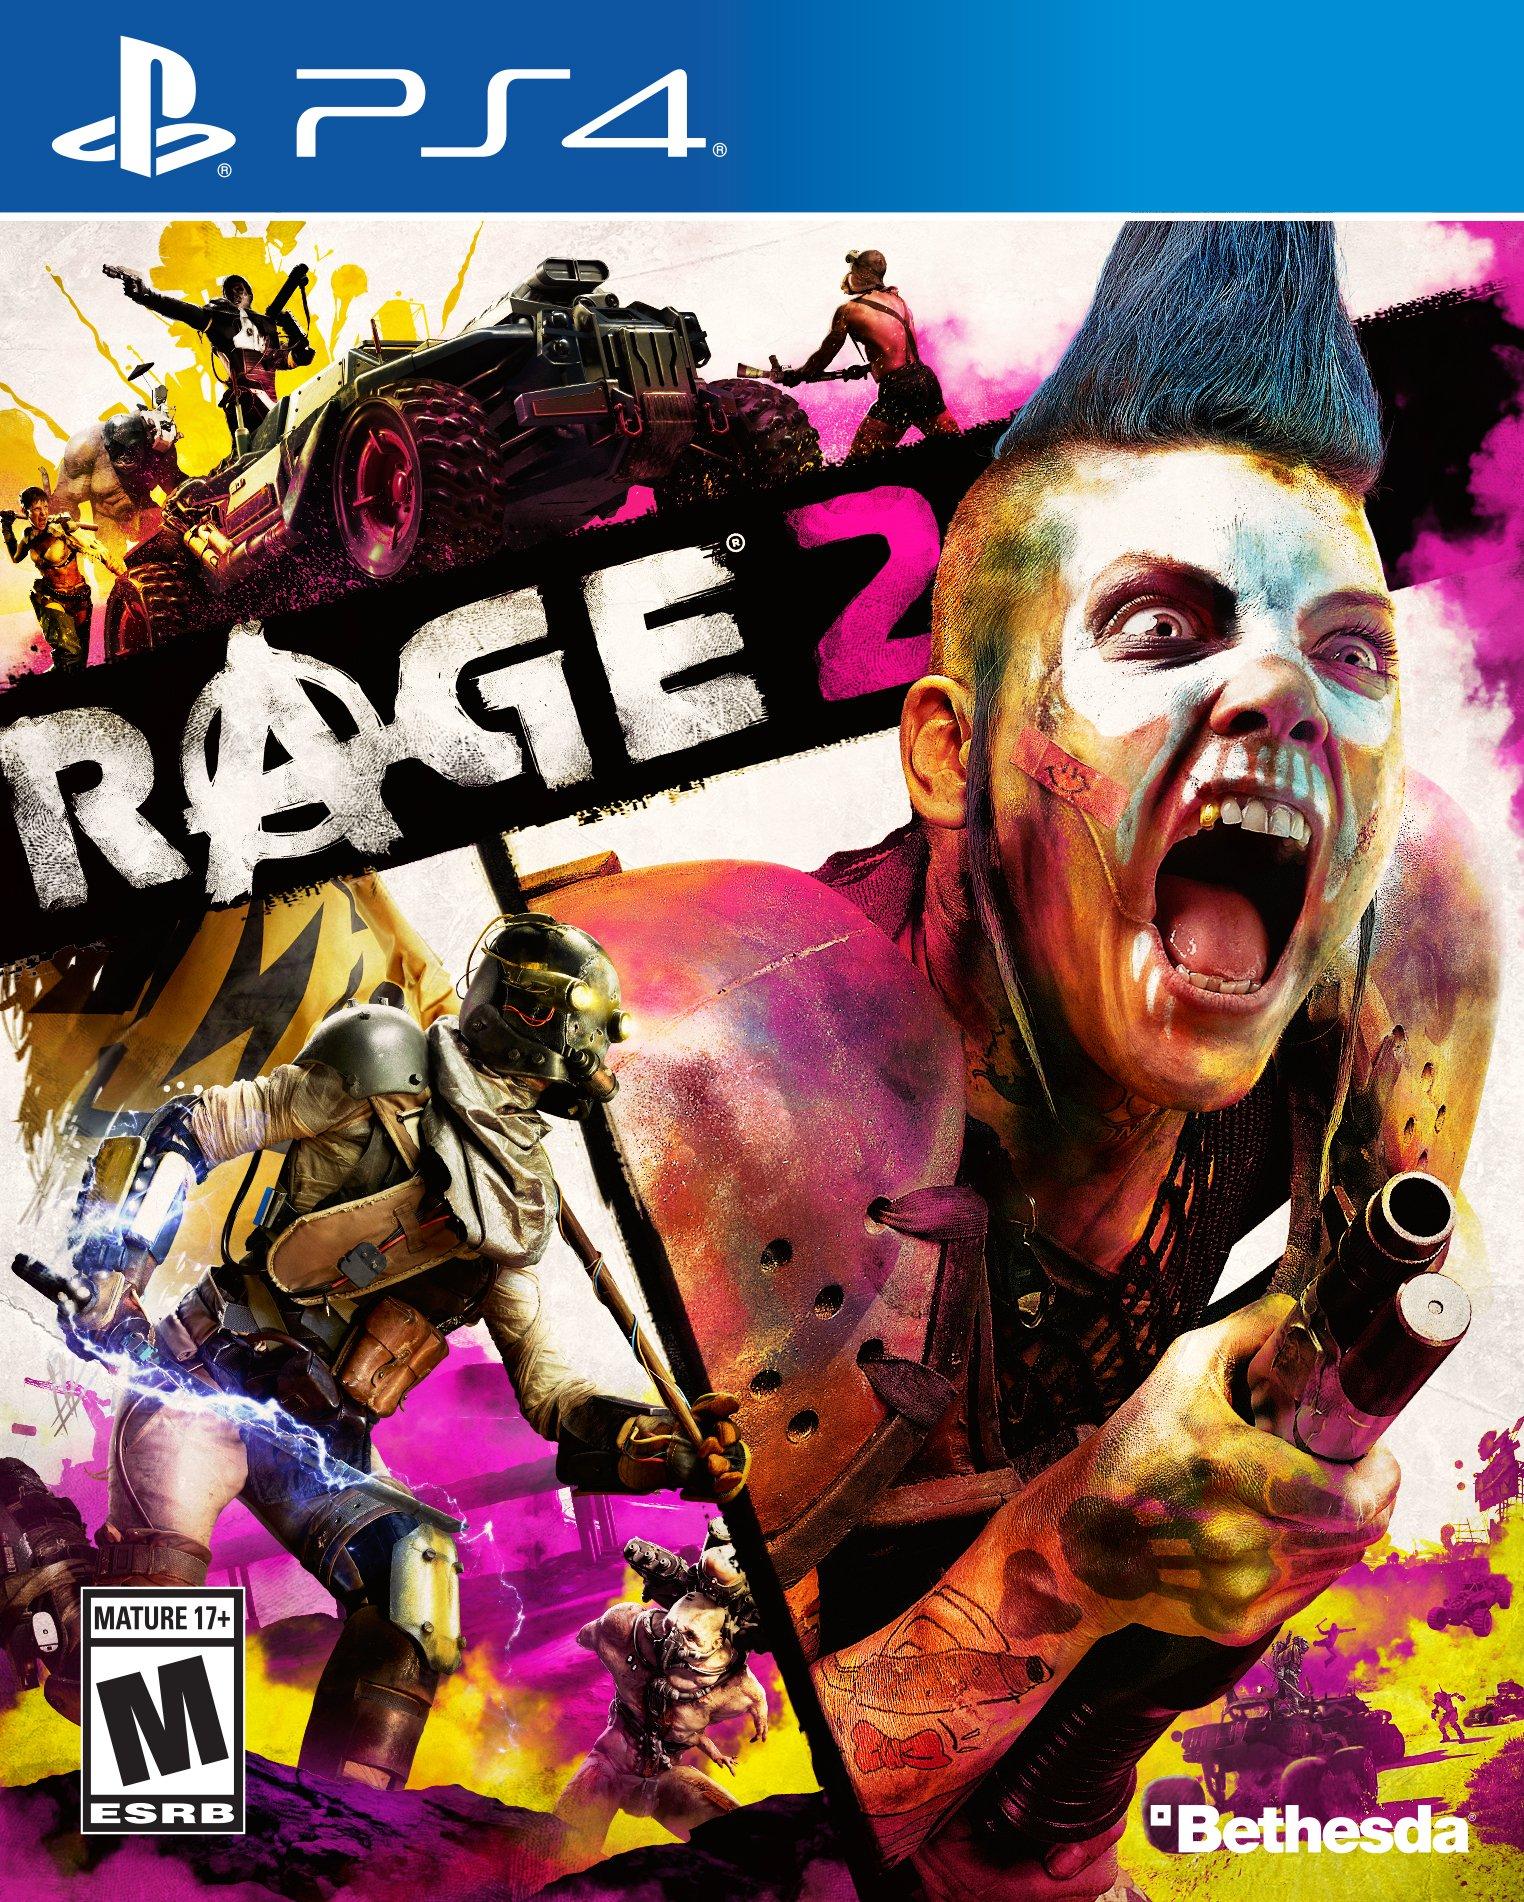 rage 2 ps4 game